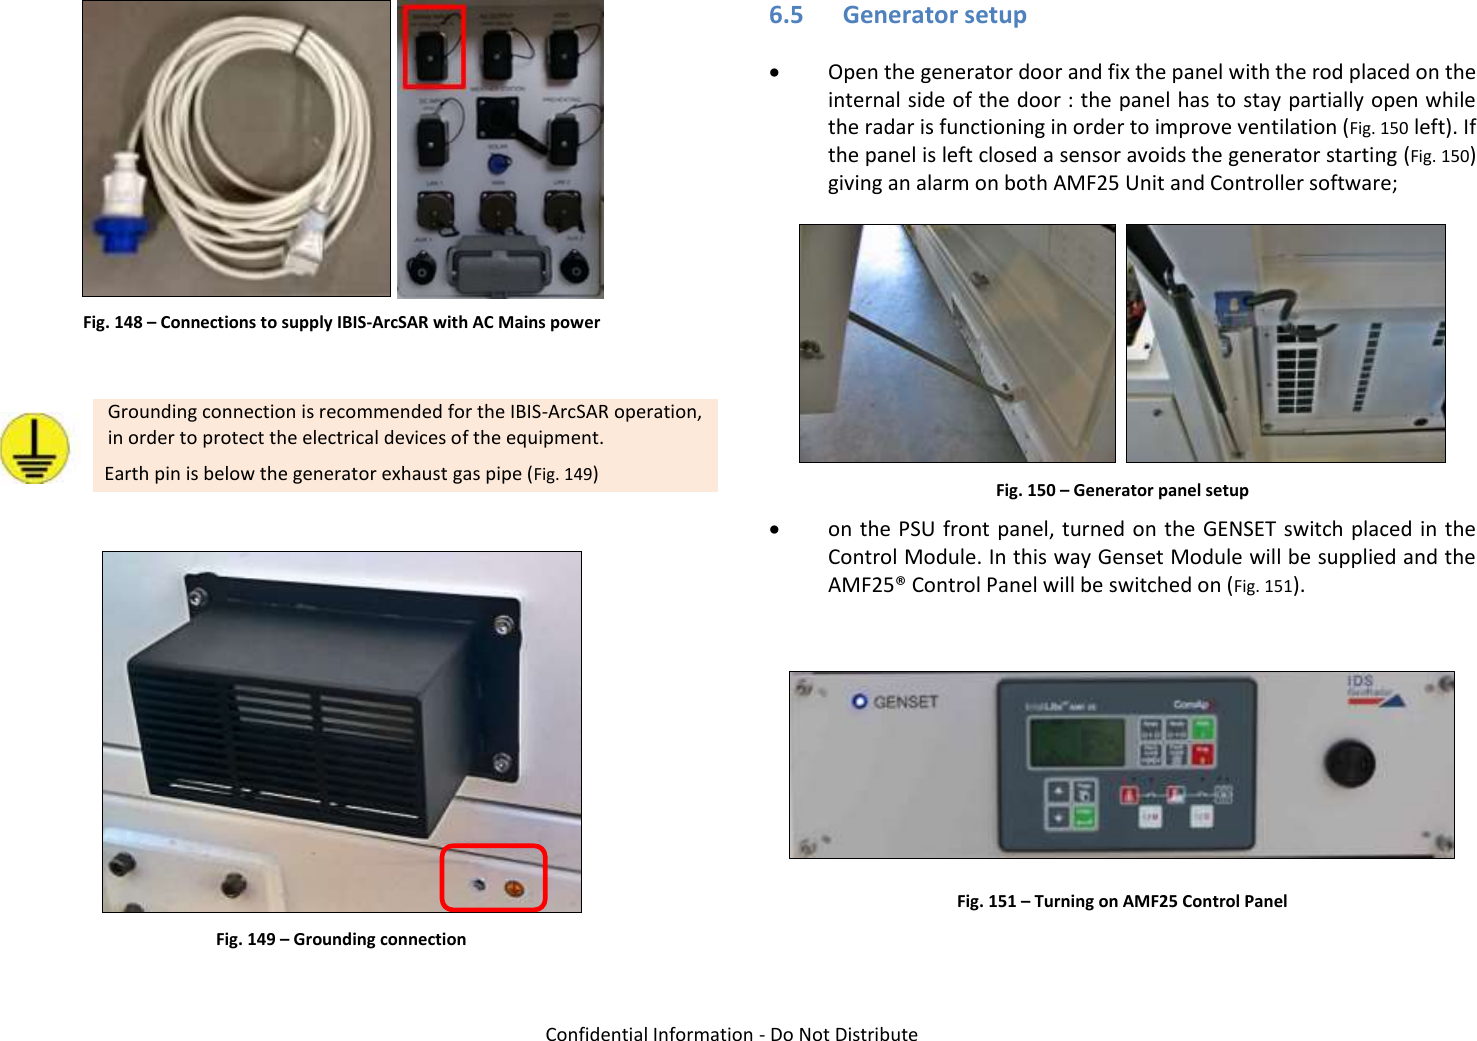   Confidential Information - Do Not Distribute    Fig. 148 – Connections to supply IBIS-ArcSAR with AC Mains power   Grounding connection is recommended for the IBIS-ArcSAR operation, in order to protect the electrical devices of the equipment. Earth pin is below the generator exhaust gas pipe (Fig. 149)   Fig. 149 – Grounding connection 6.5 Generator setup  Open the generator door and fix the panel with the rod placed on the internal side of the door : the panel has to stay partially open while the radar is functioning in order to improve ventilation (Fig. 150 left). If the panel is left closed a sensor avoids the generator starting (Fig. 150) giving an alarm on both AMF25 Unit and Controller software;    Fig. 150 – Generator panel setup  on the PSU front panel, turned on the GENSET switch placed in the Control Module. In this way Genset Module will be supplied and the AMF25® Control Panel will be switched on (Fig. 151).   Fig. 151 – Turning on AMF25 Control Panel  